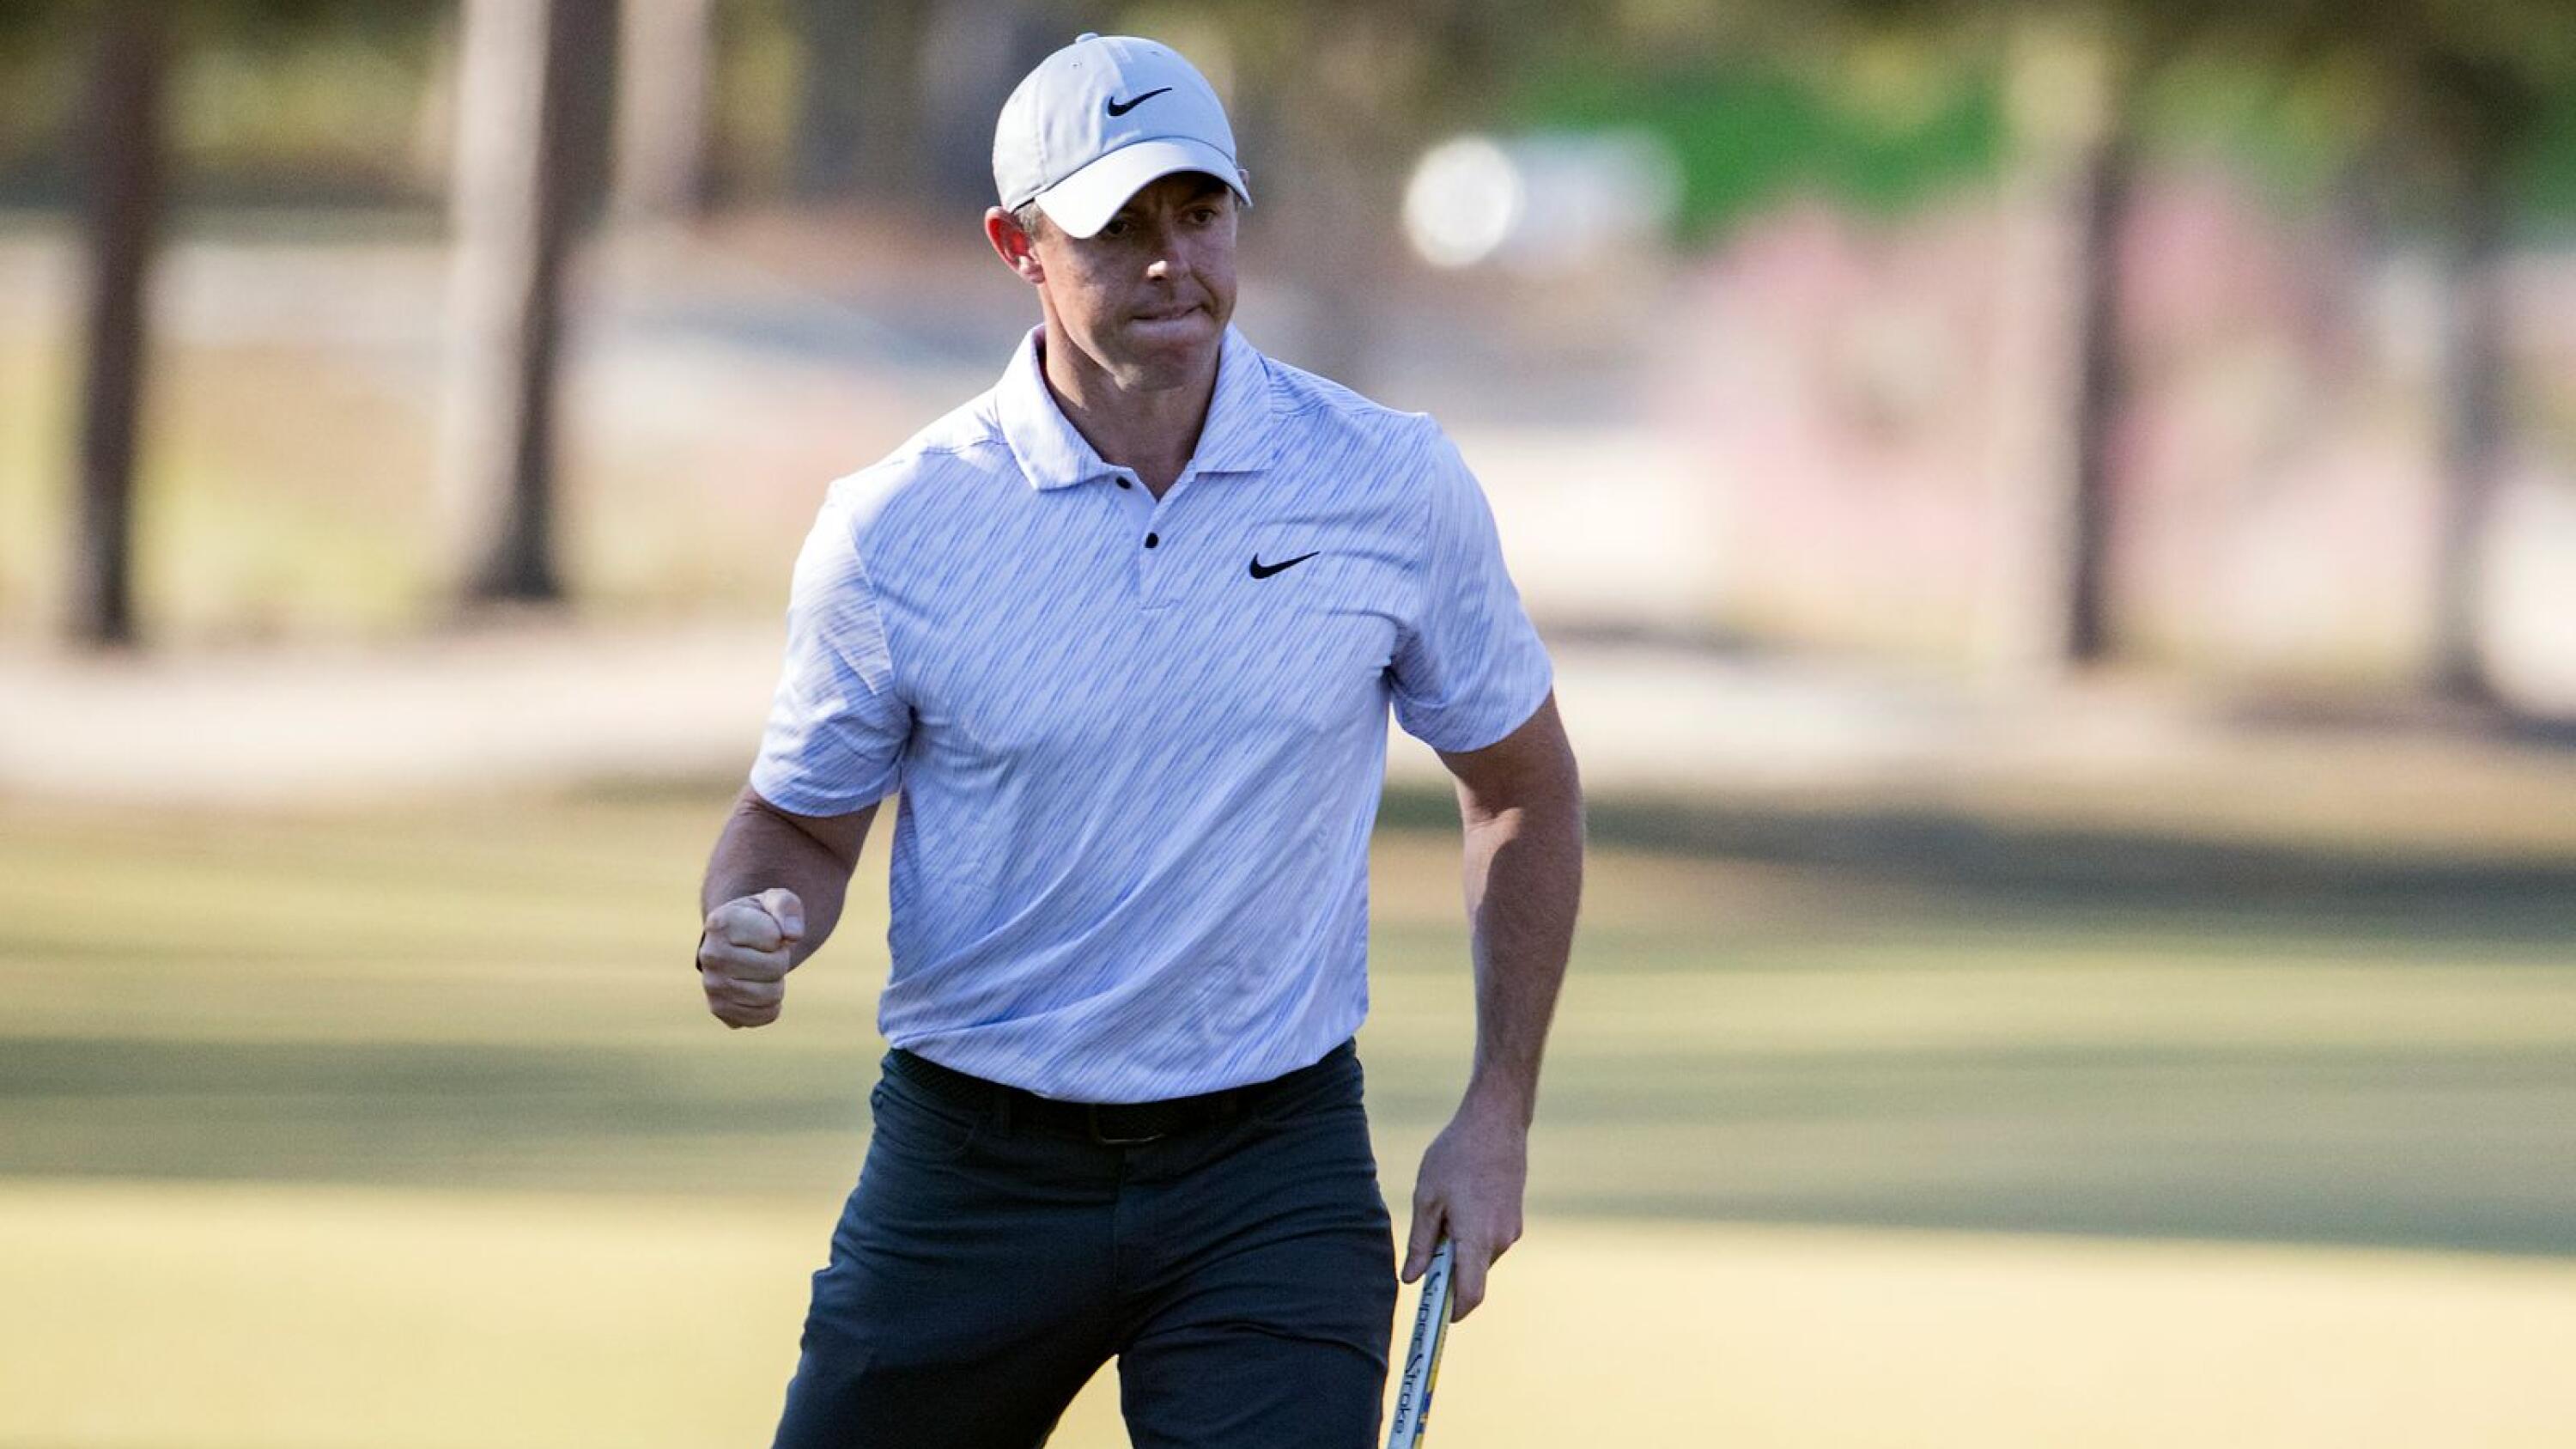 He's fit but he's not super tall” – Dustin Johnson when he watched Rory  McIlroy's drive